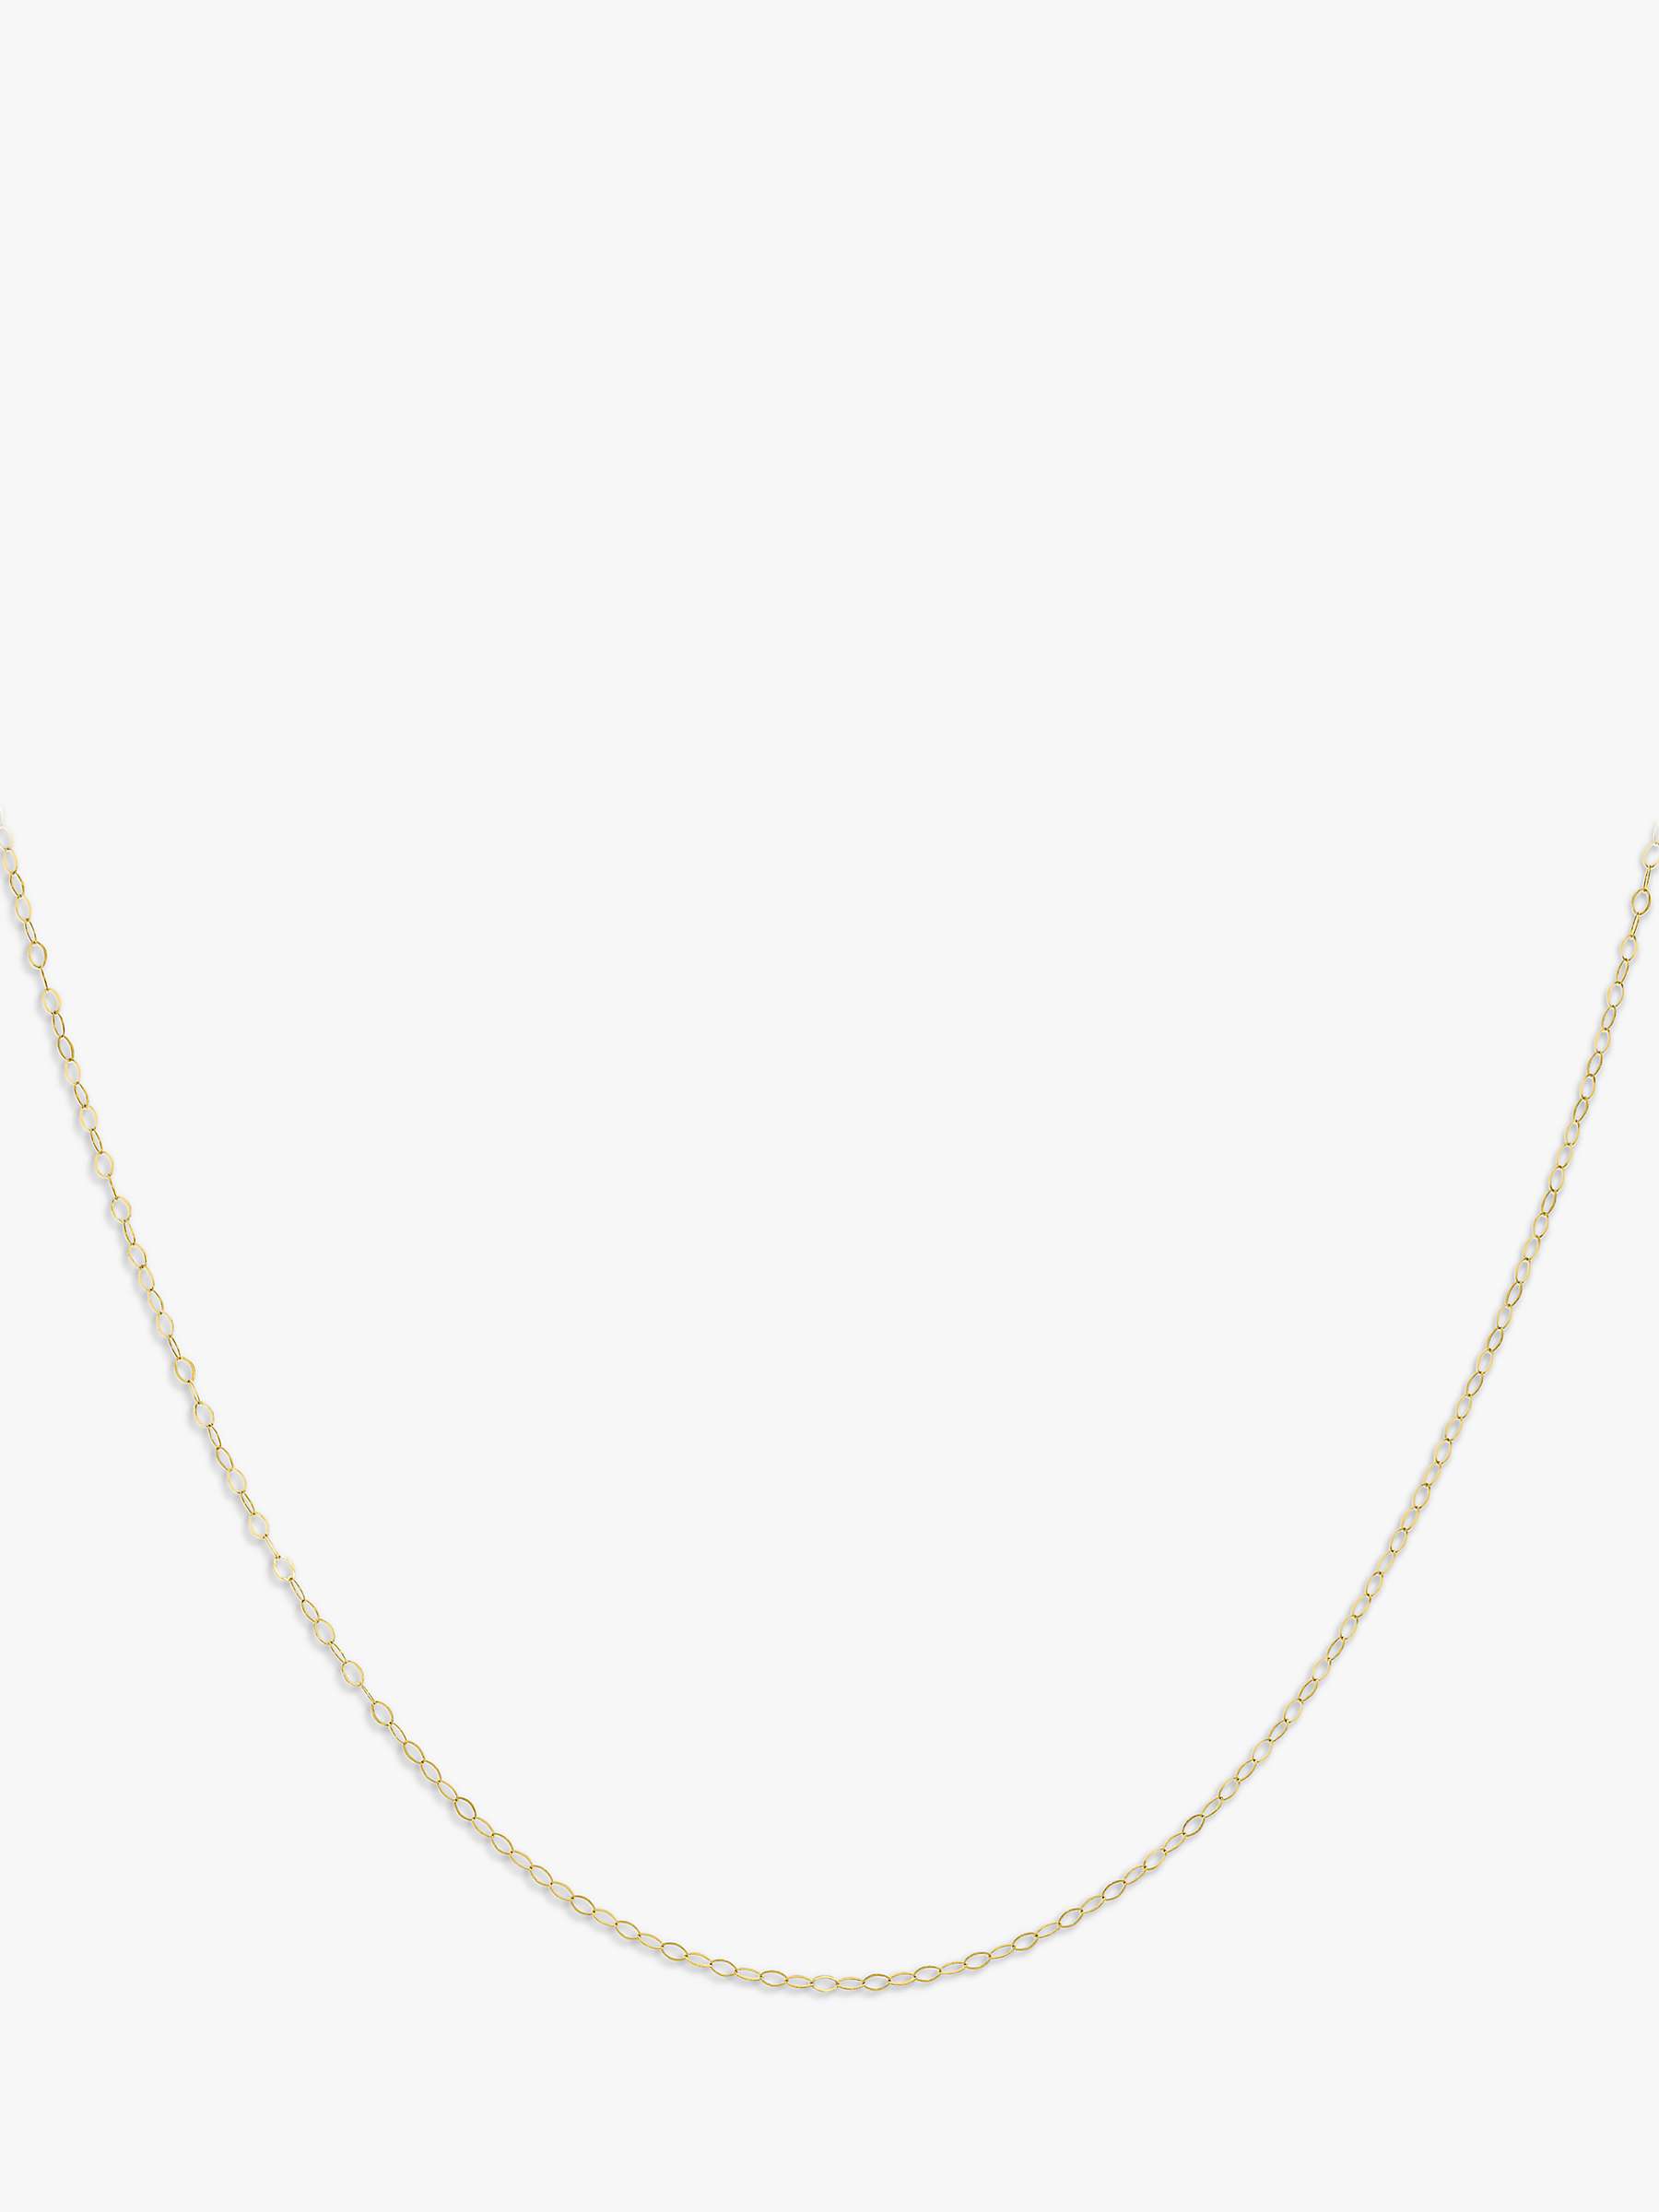 Buy IBB 9ct Yellow Gold Short Loose Link Chain Necklace, Gold Online at johnlewis.com